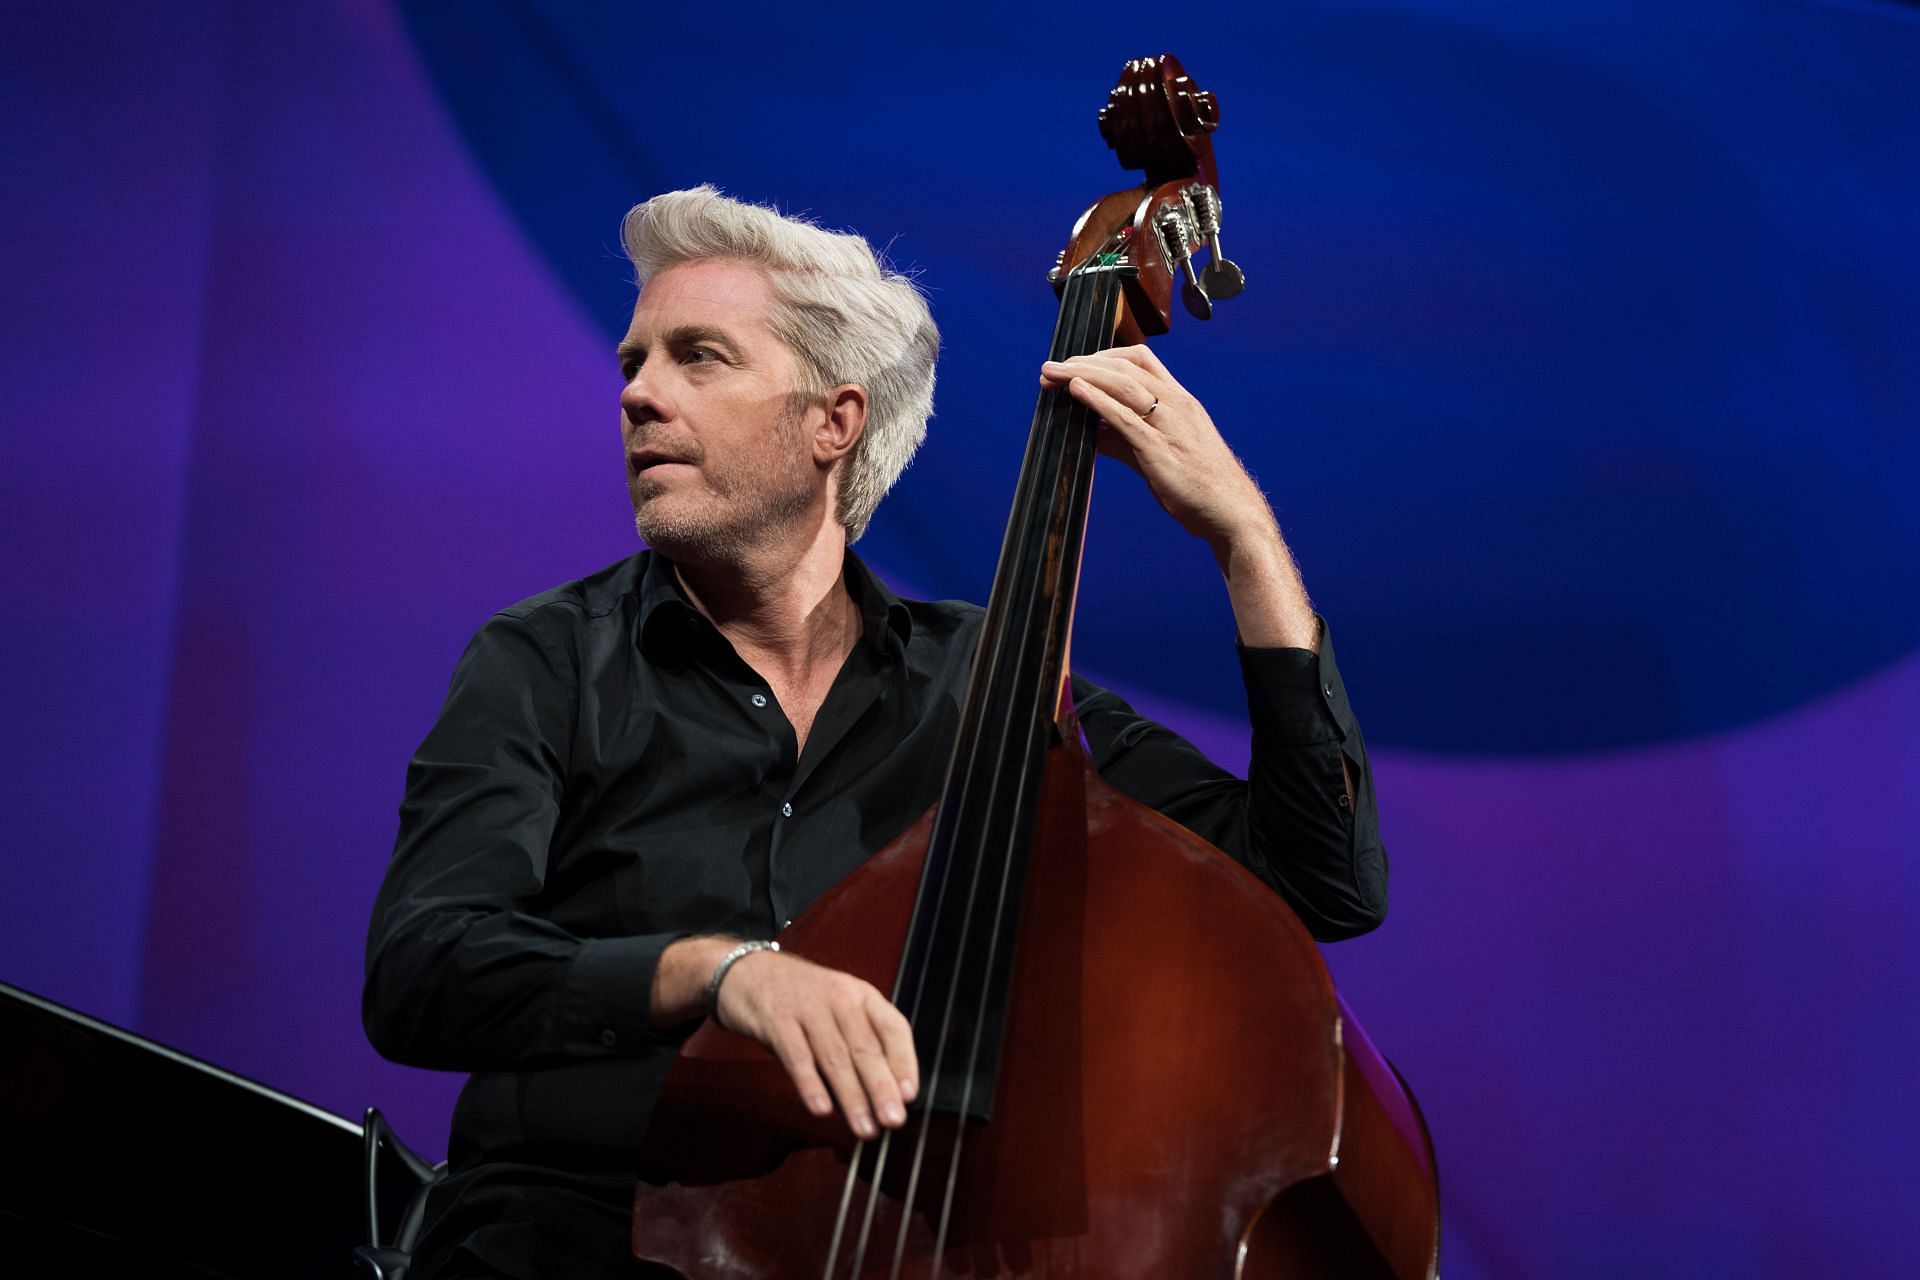 Kyle Eastwood at The 49th Deauville American Film Festival (Photo by Francois Durand/Getty Images)